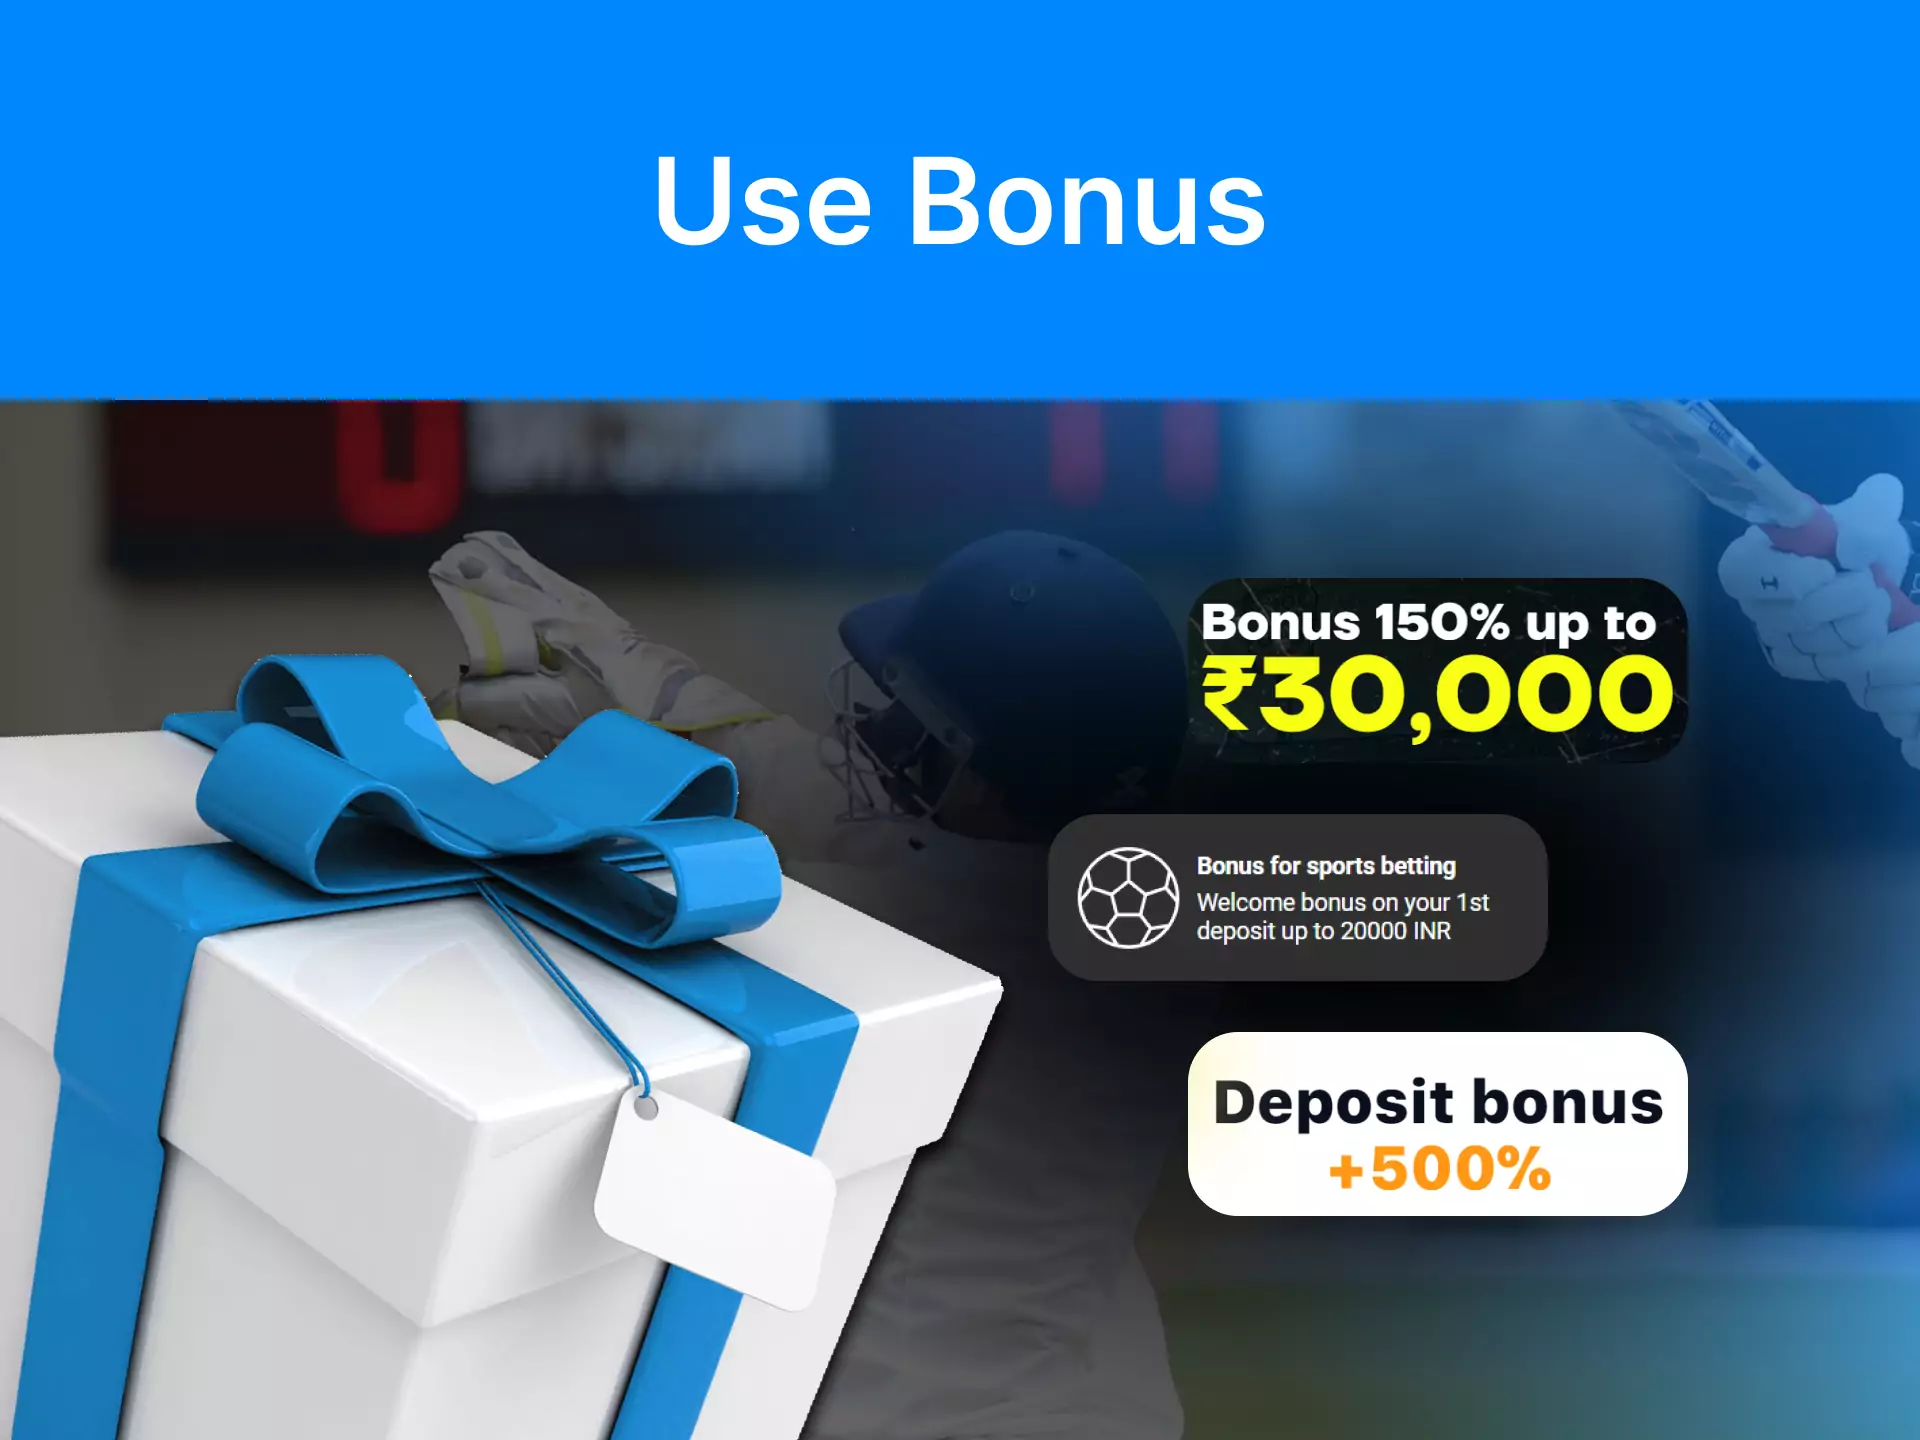 Use the bonuses to get more benefits when you bet.